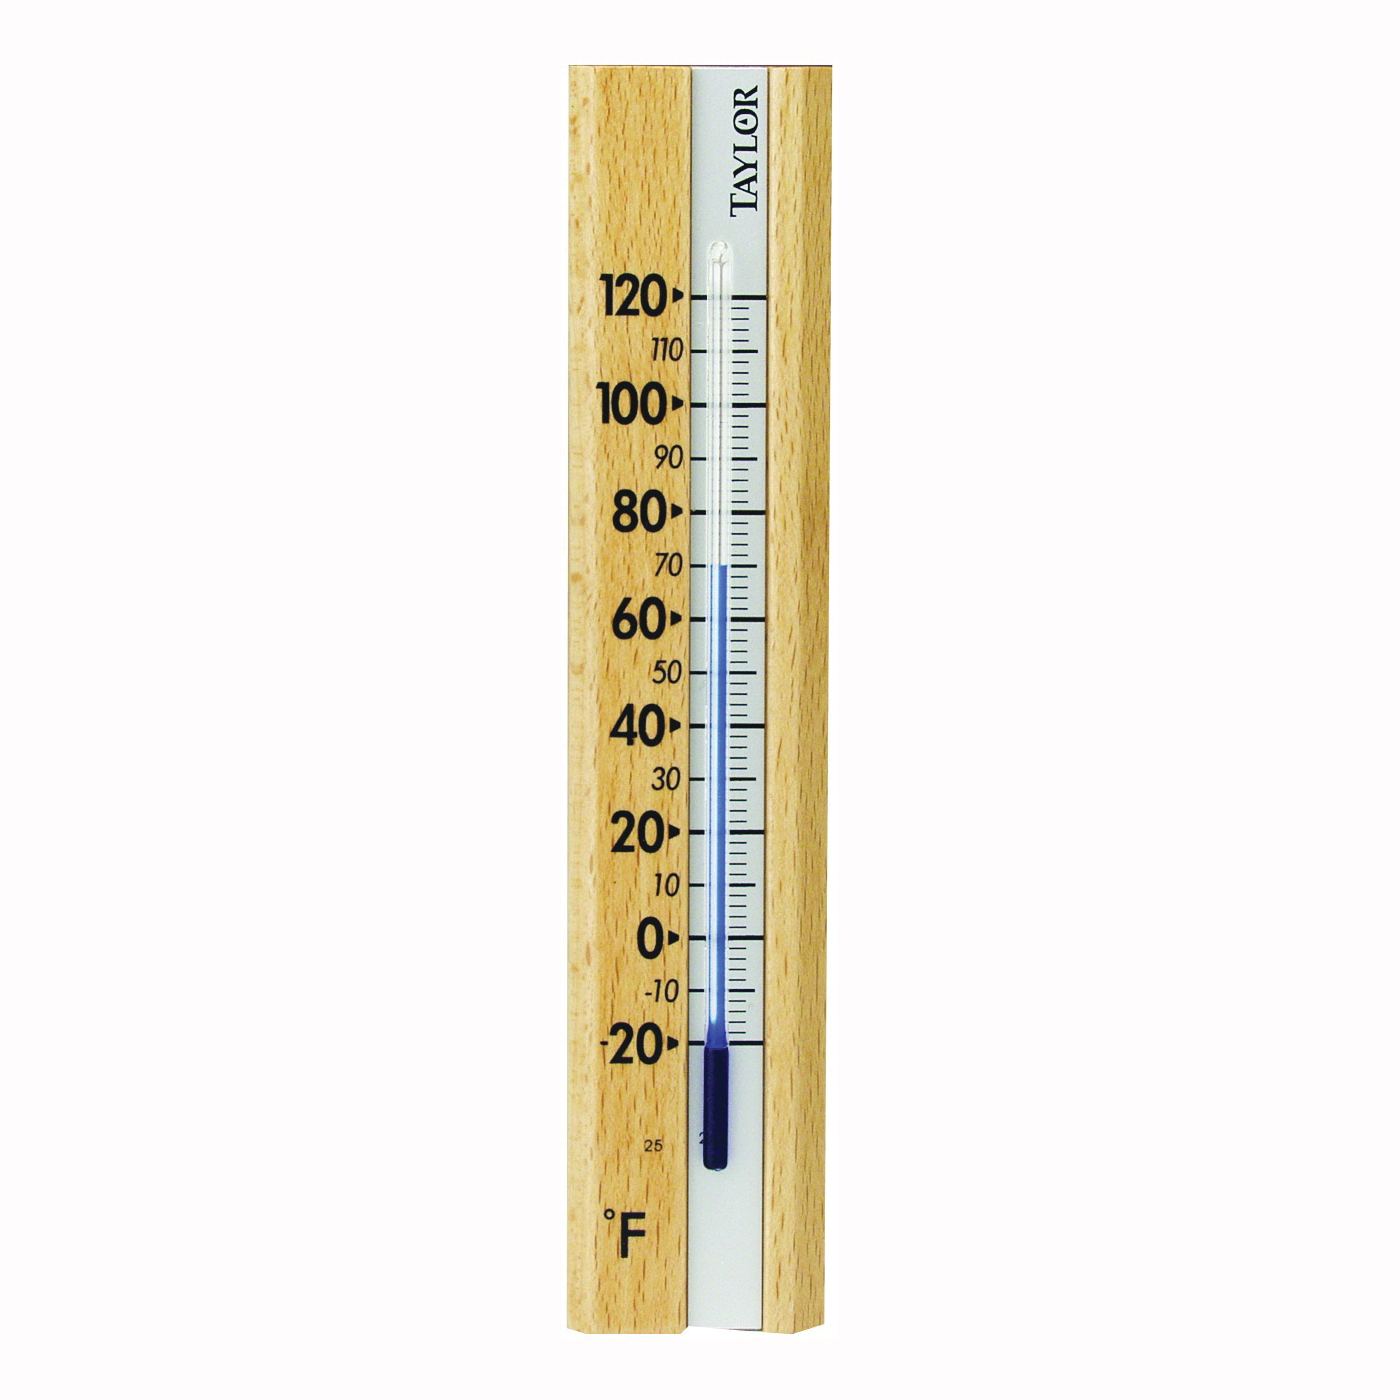 Taylor 5153 7 5/8 Outdoor Window Thermometer